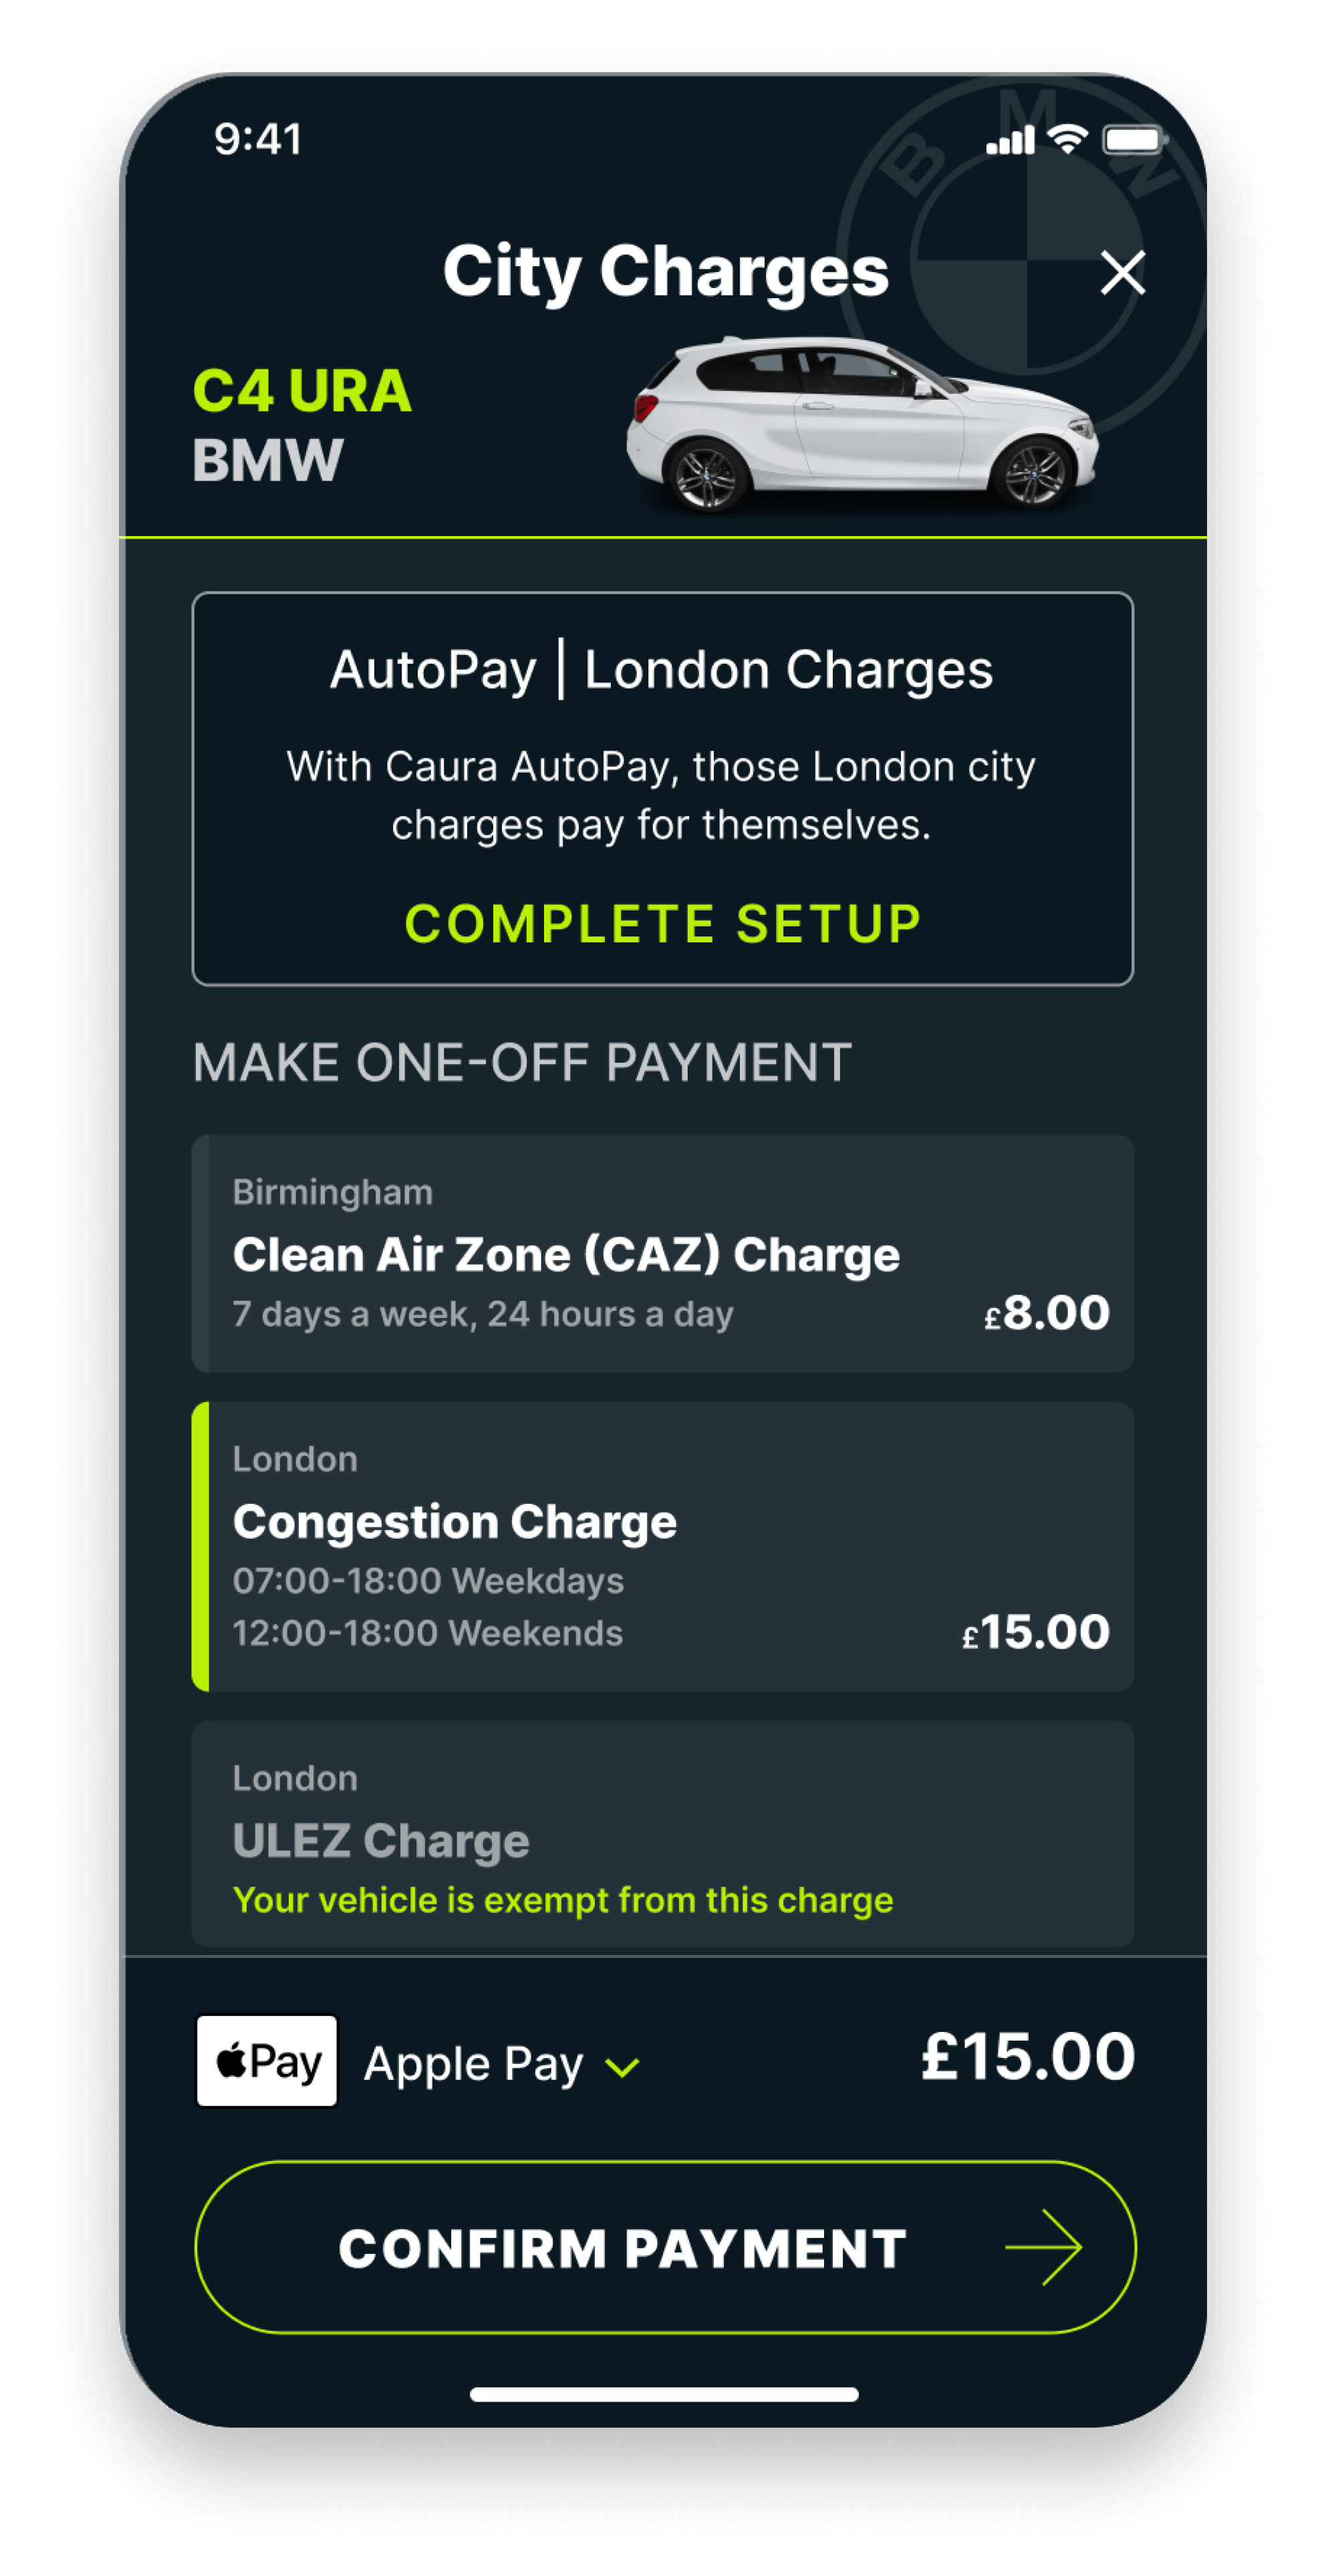 Paying for the London Congestion Zone on Caura, whilst also showing the Birmingham Clean Air Zone and London ULEZ Charge